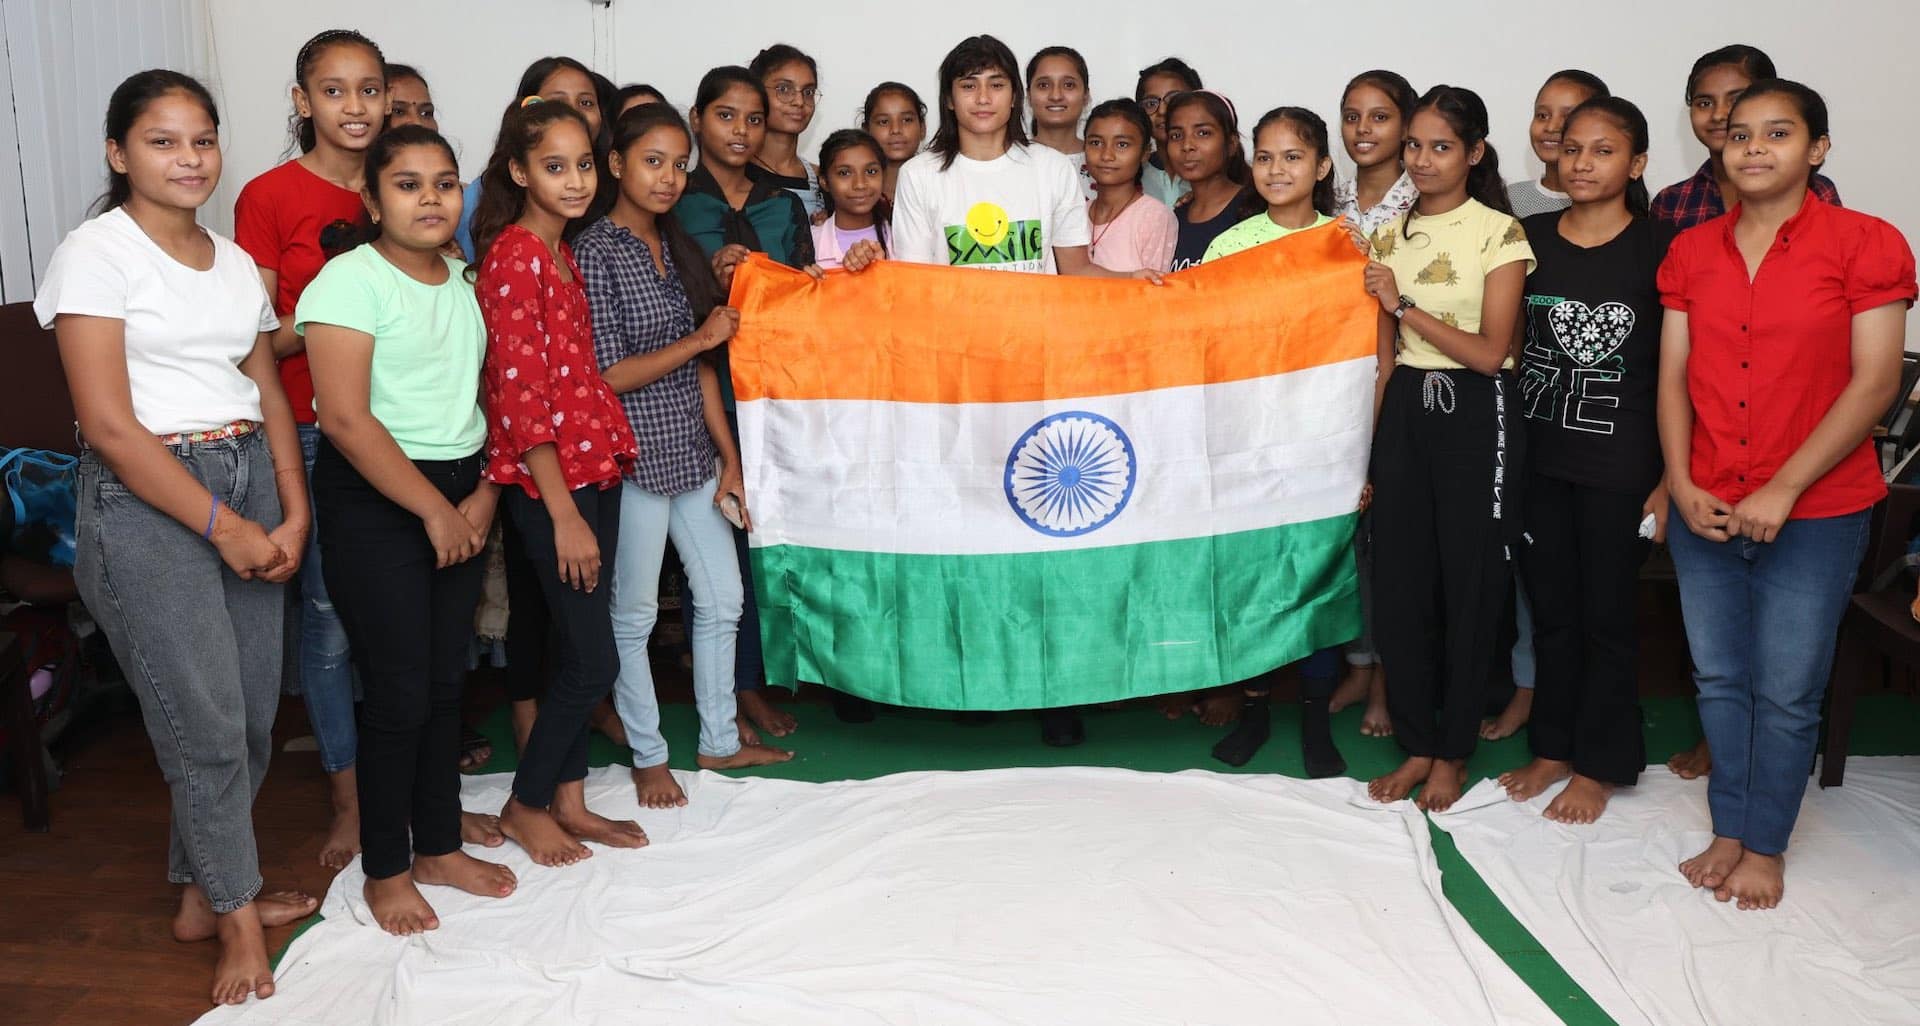 Wrestler Pooja Gehlot champions girl’s rights with Smile Foundation